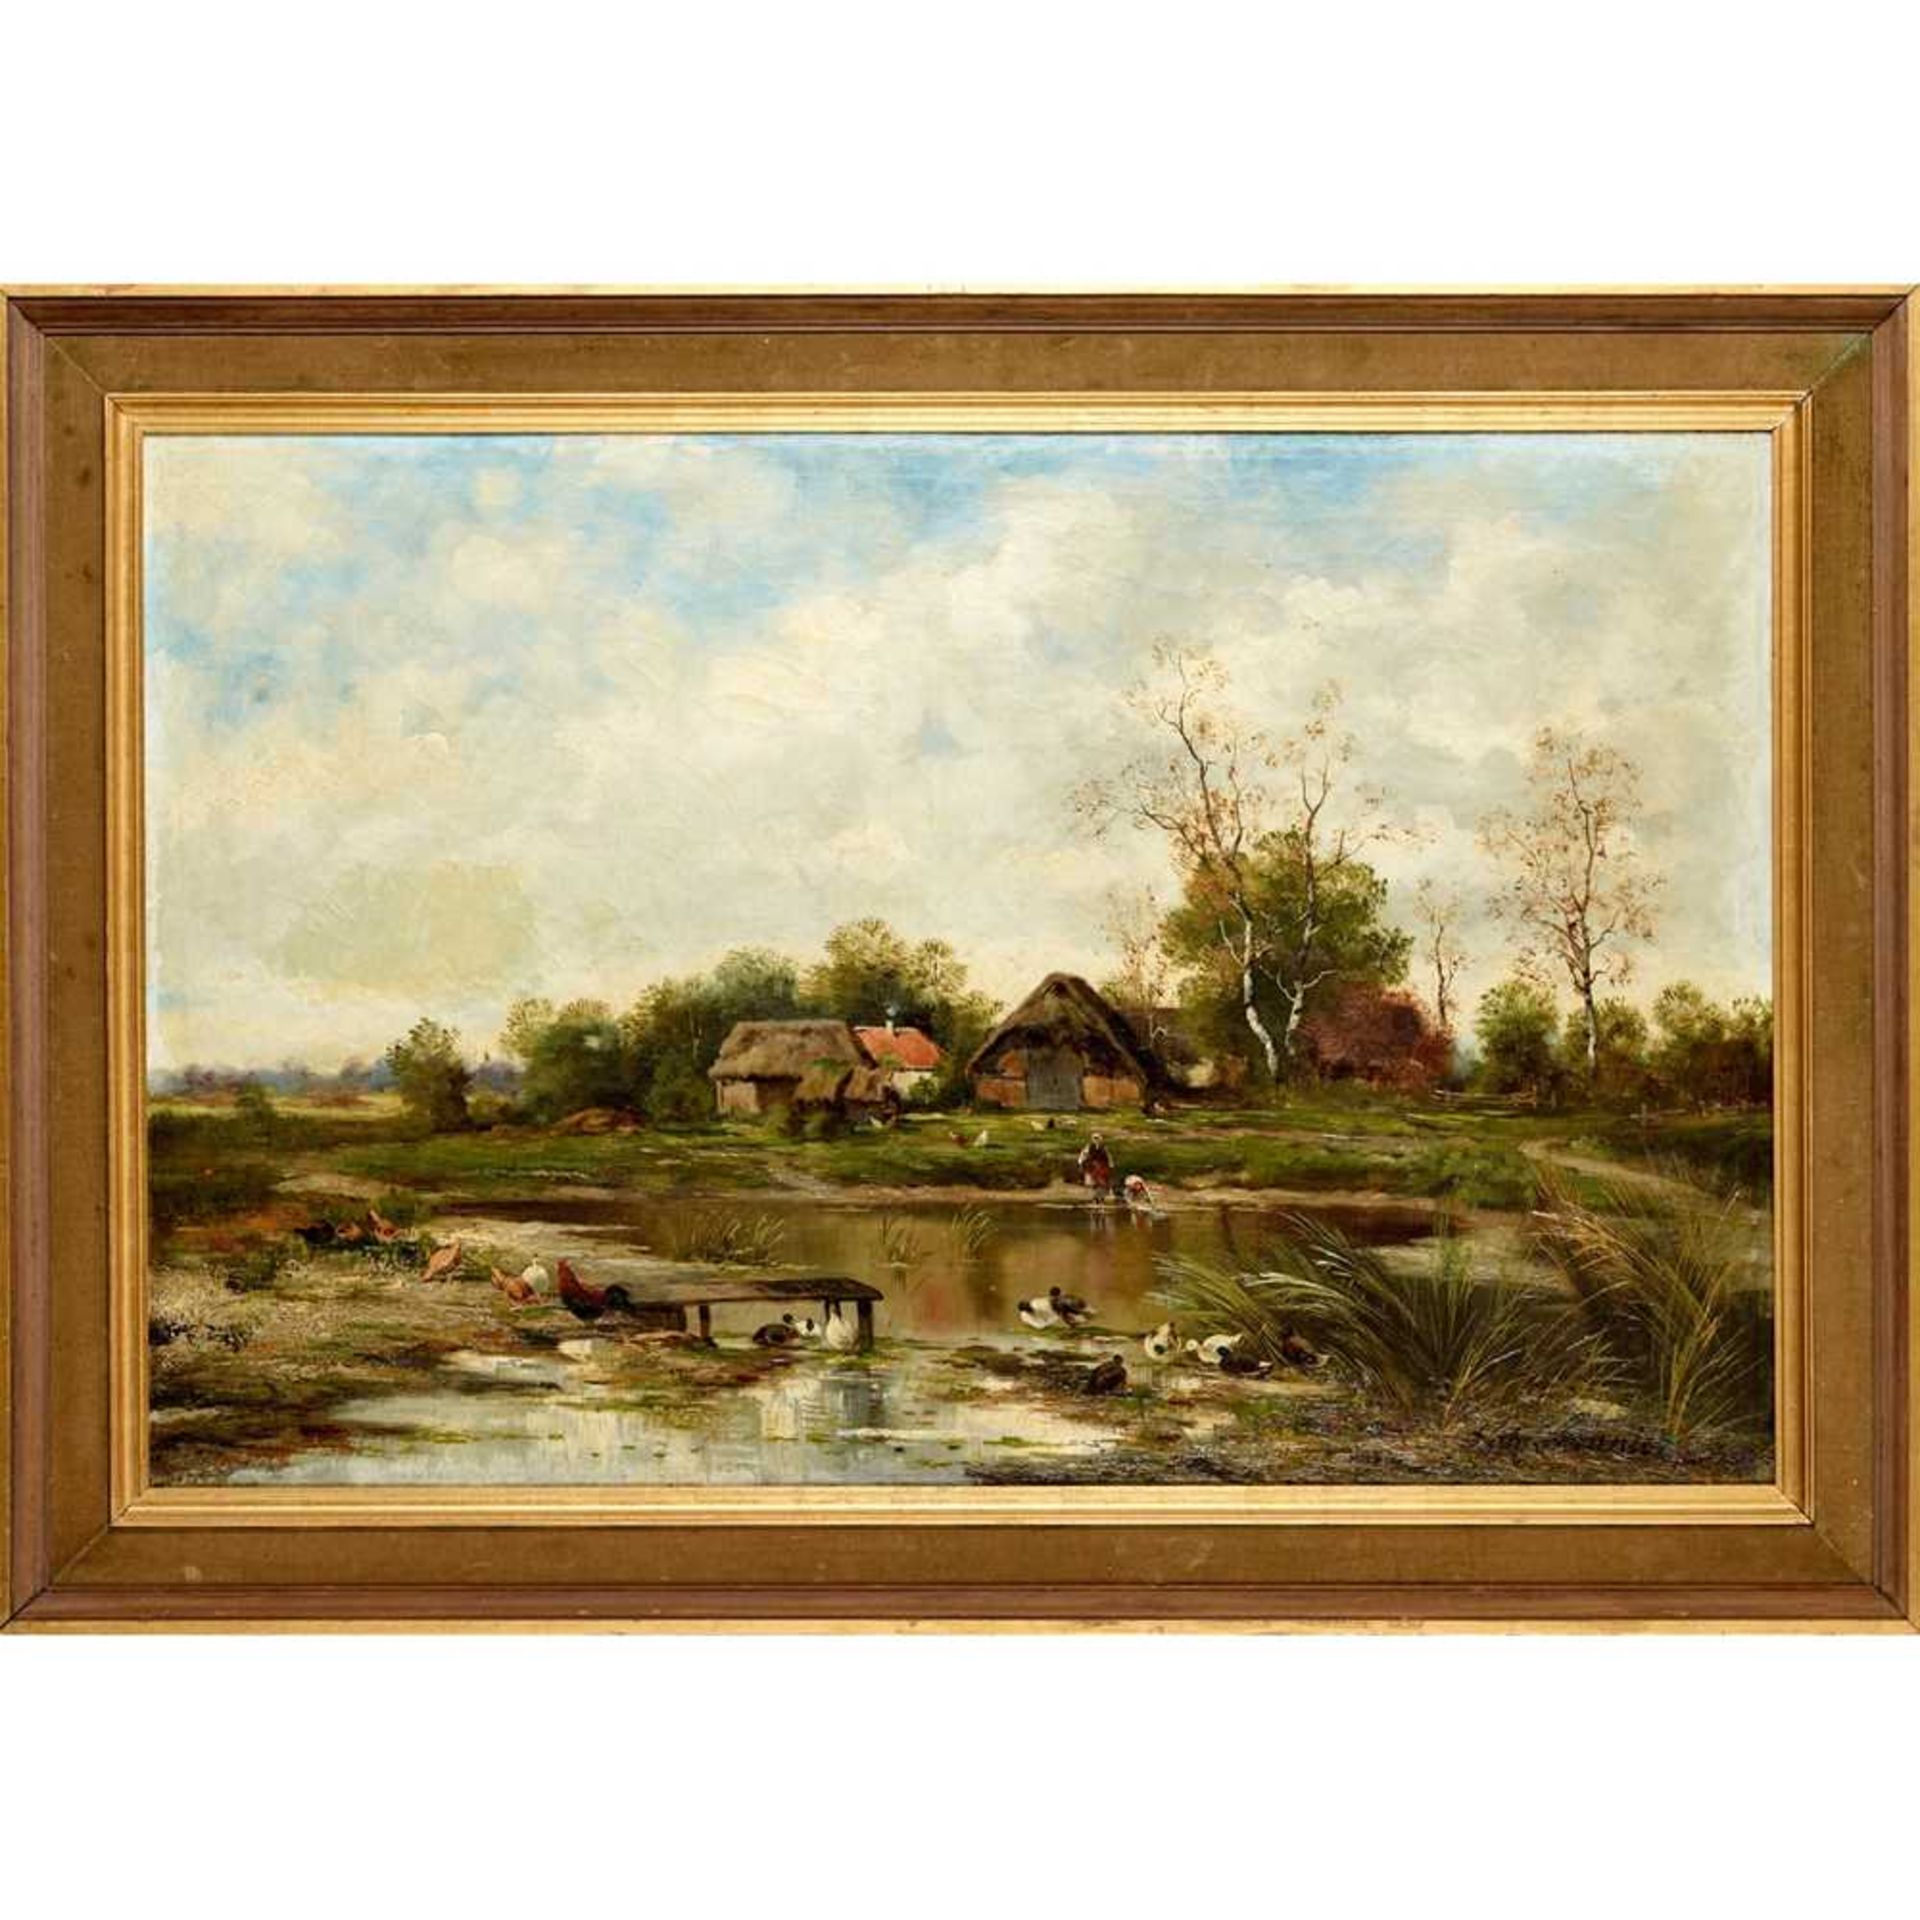 NOEL SAUNIER (FRENCH 1847-1890) A FARMYARD SCENE WITH DUCKS BY A POND - Image 2 of 3